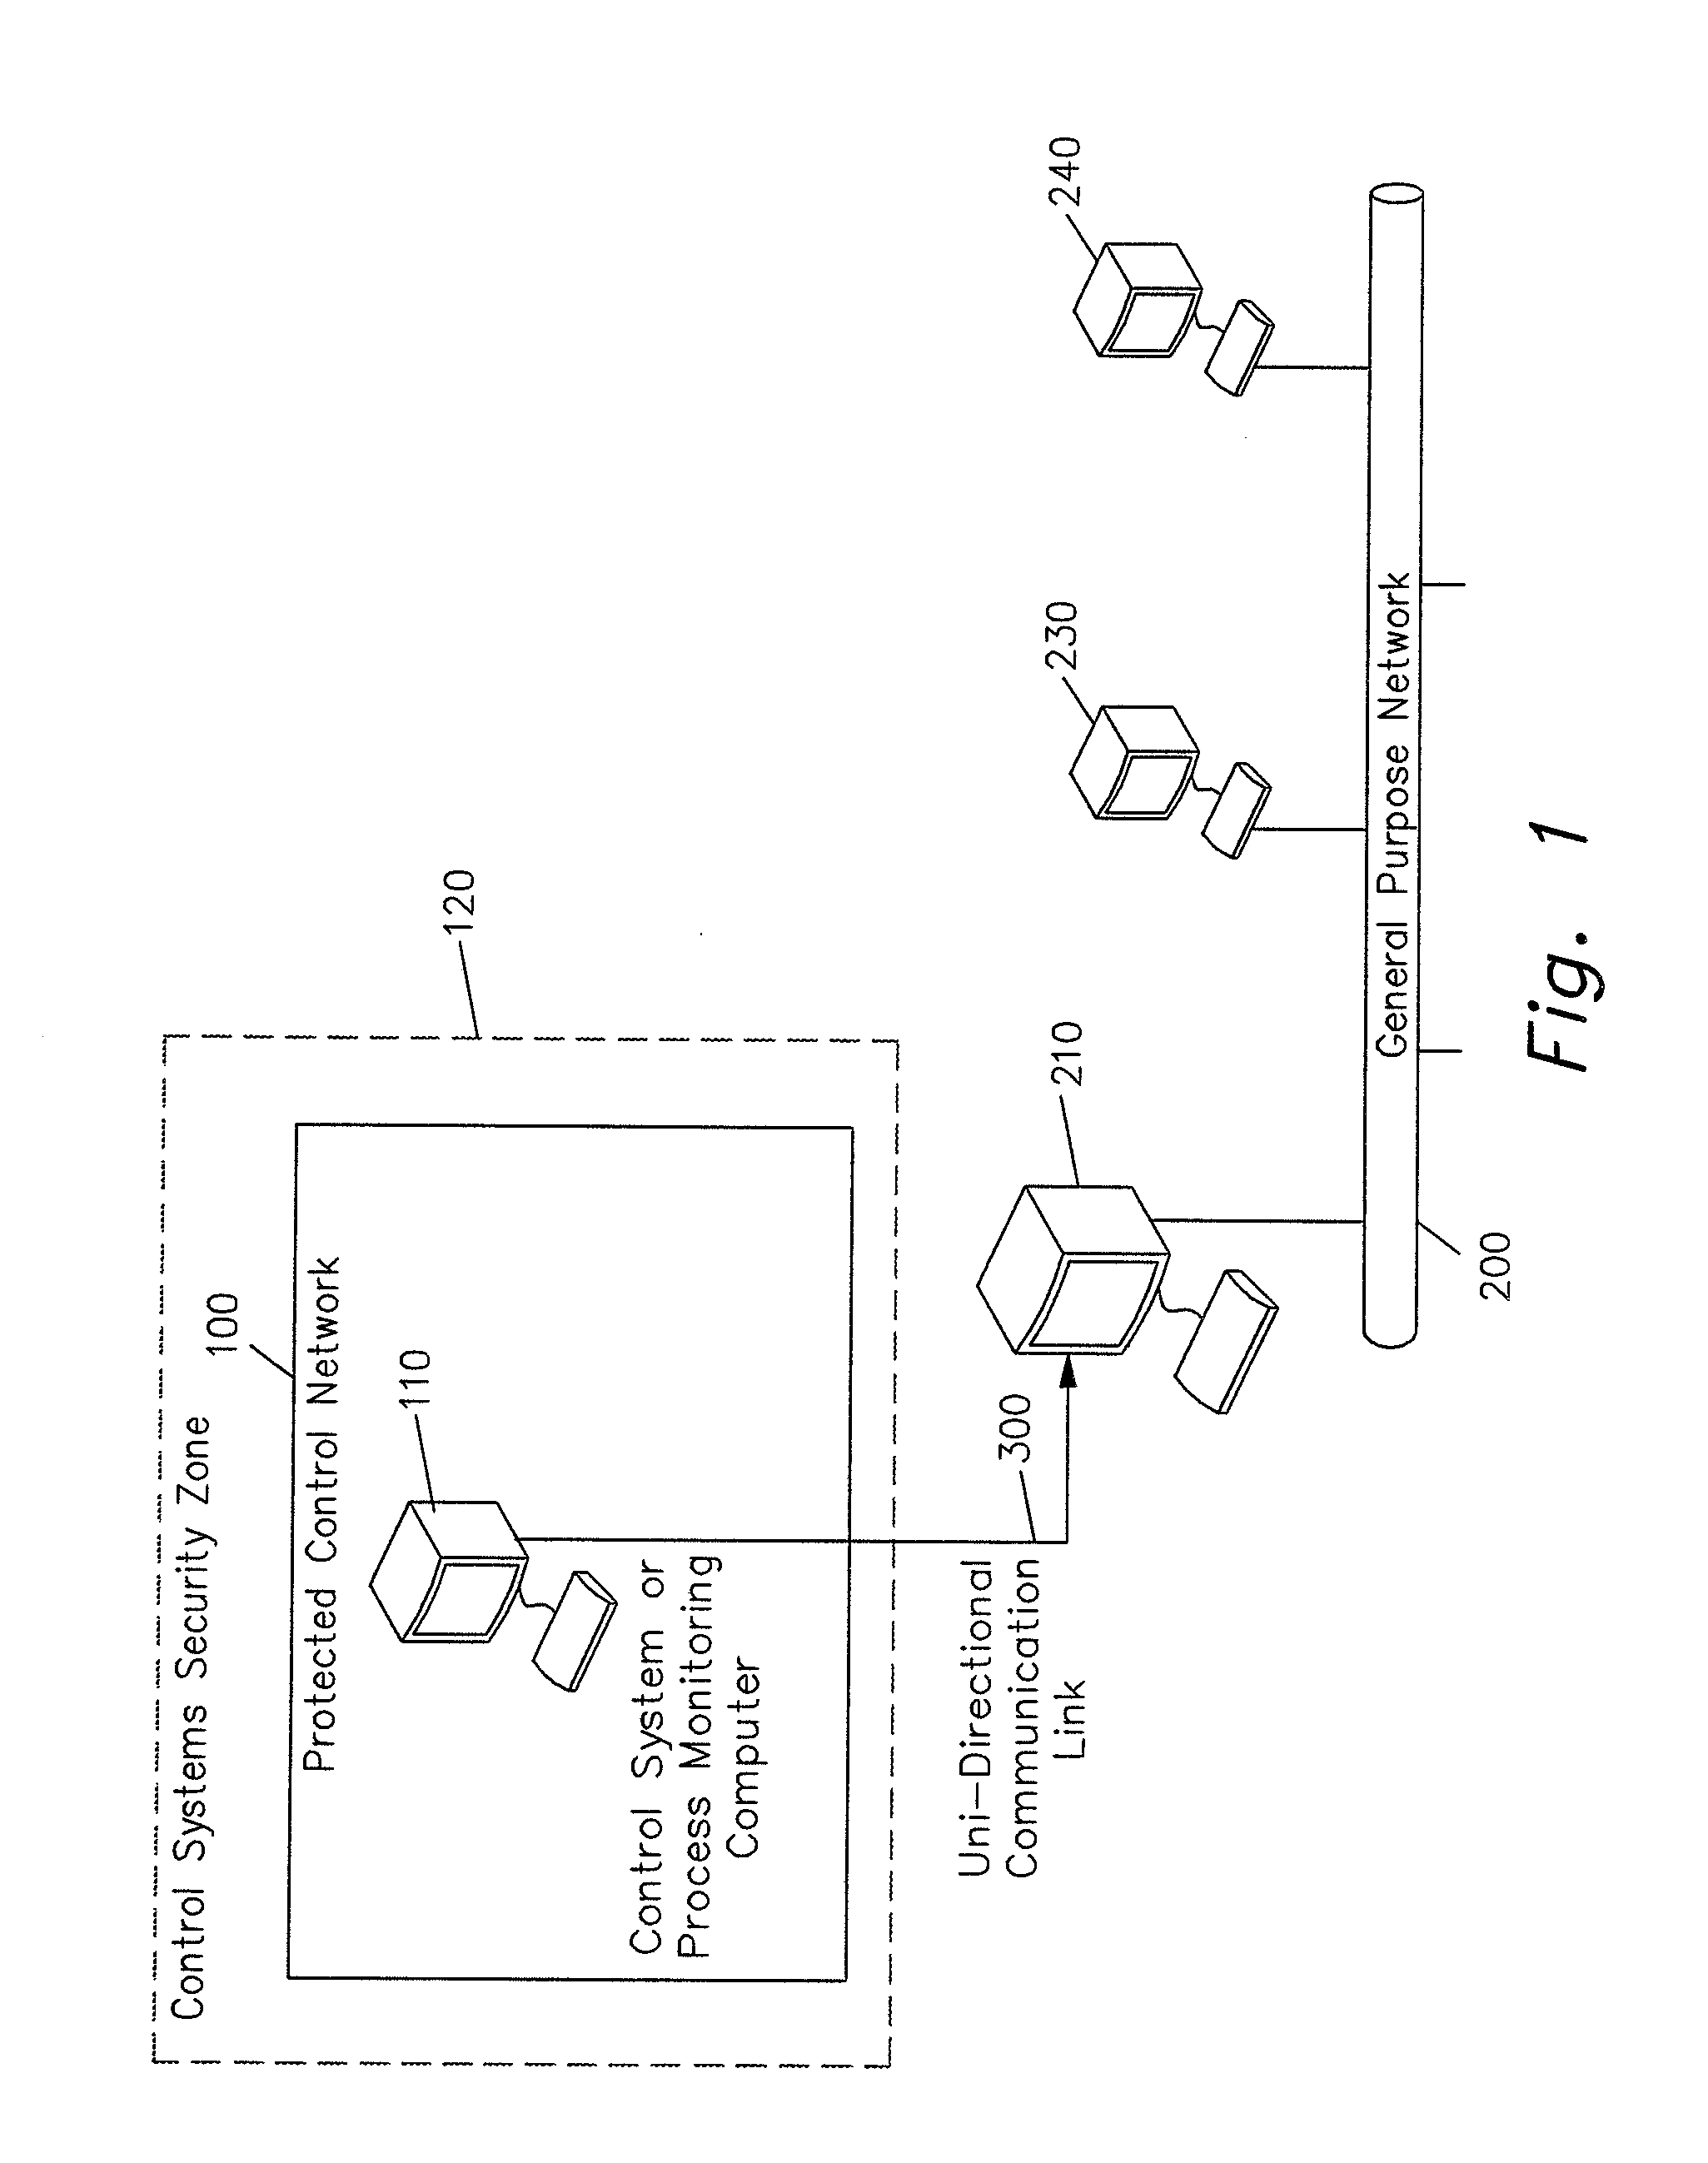 Method for securely transmitting control data from a secure network